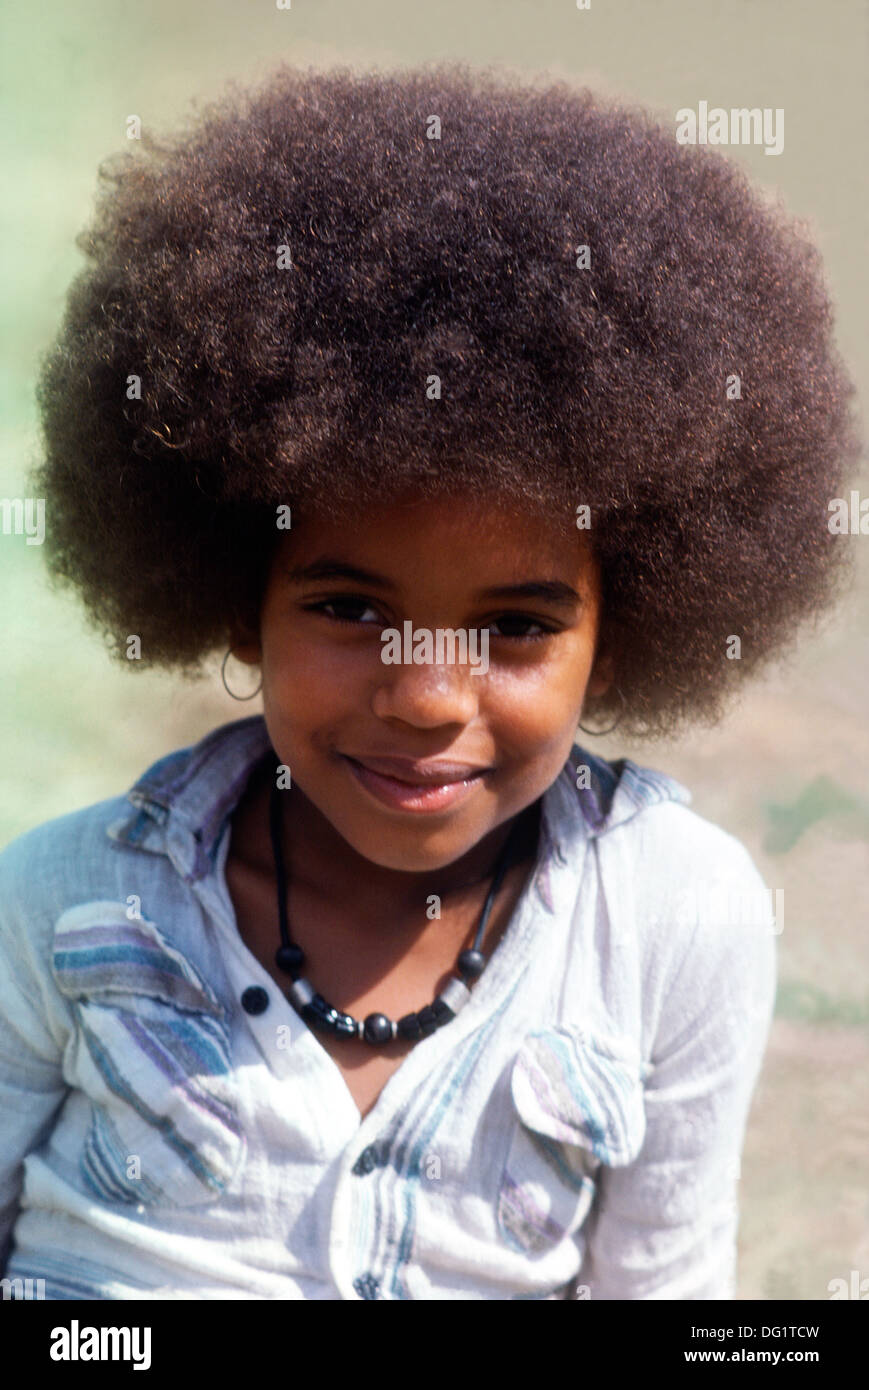 Beautiful black girl Afro American child smiling with an Afro hair style  1970s seventies fashion referred